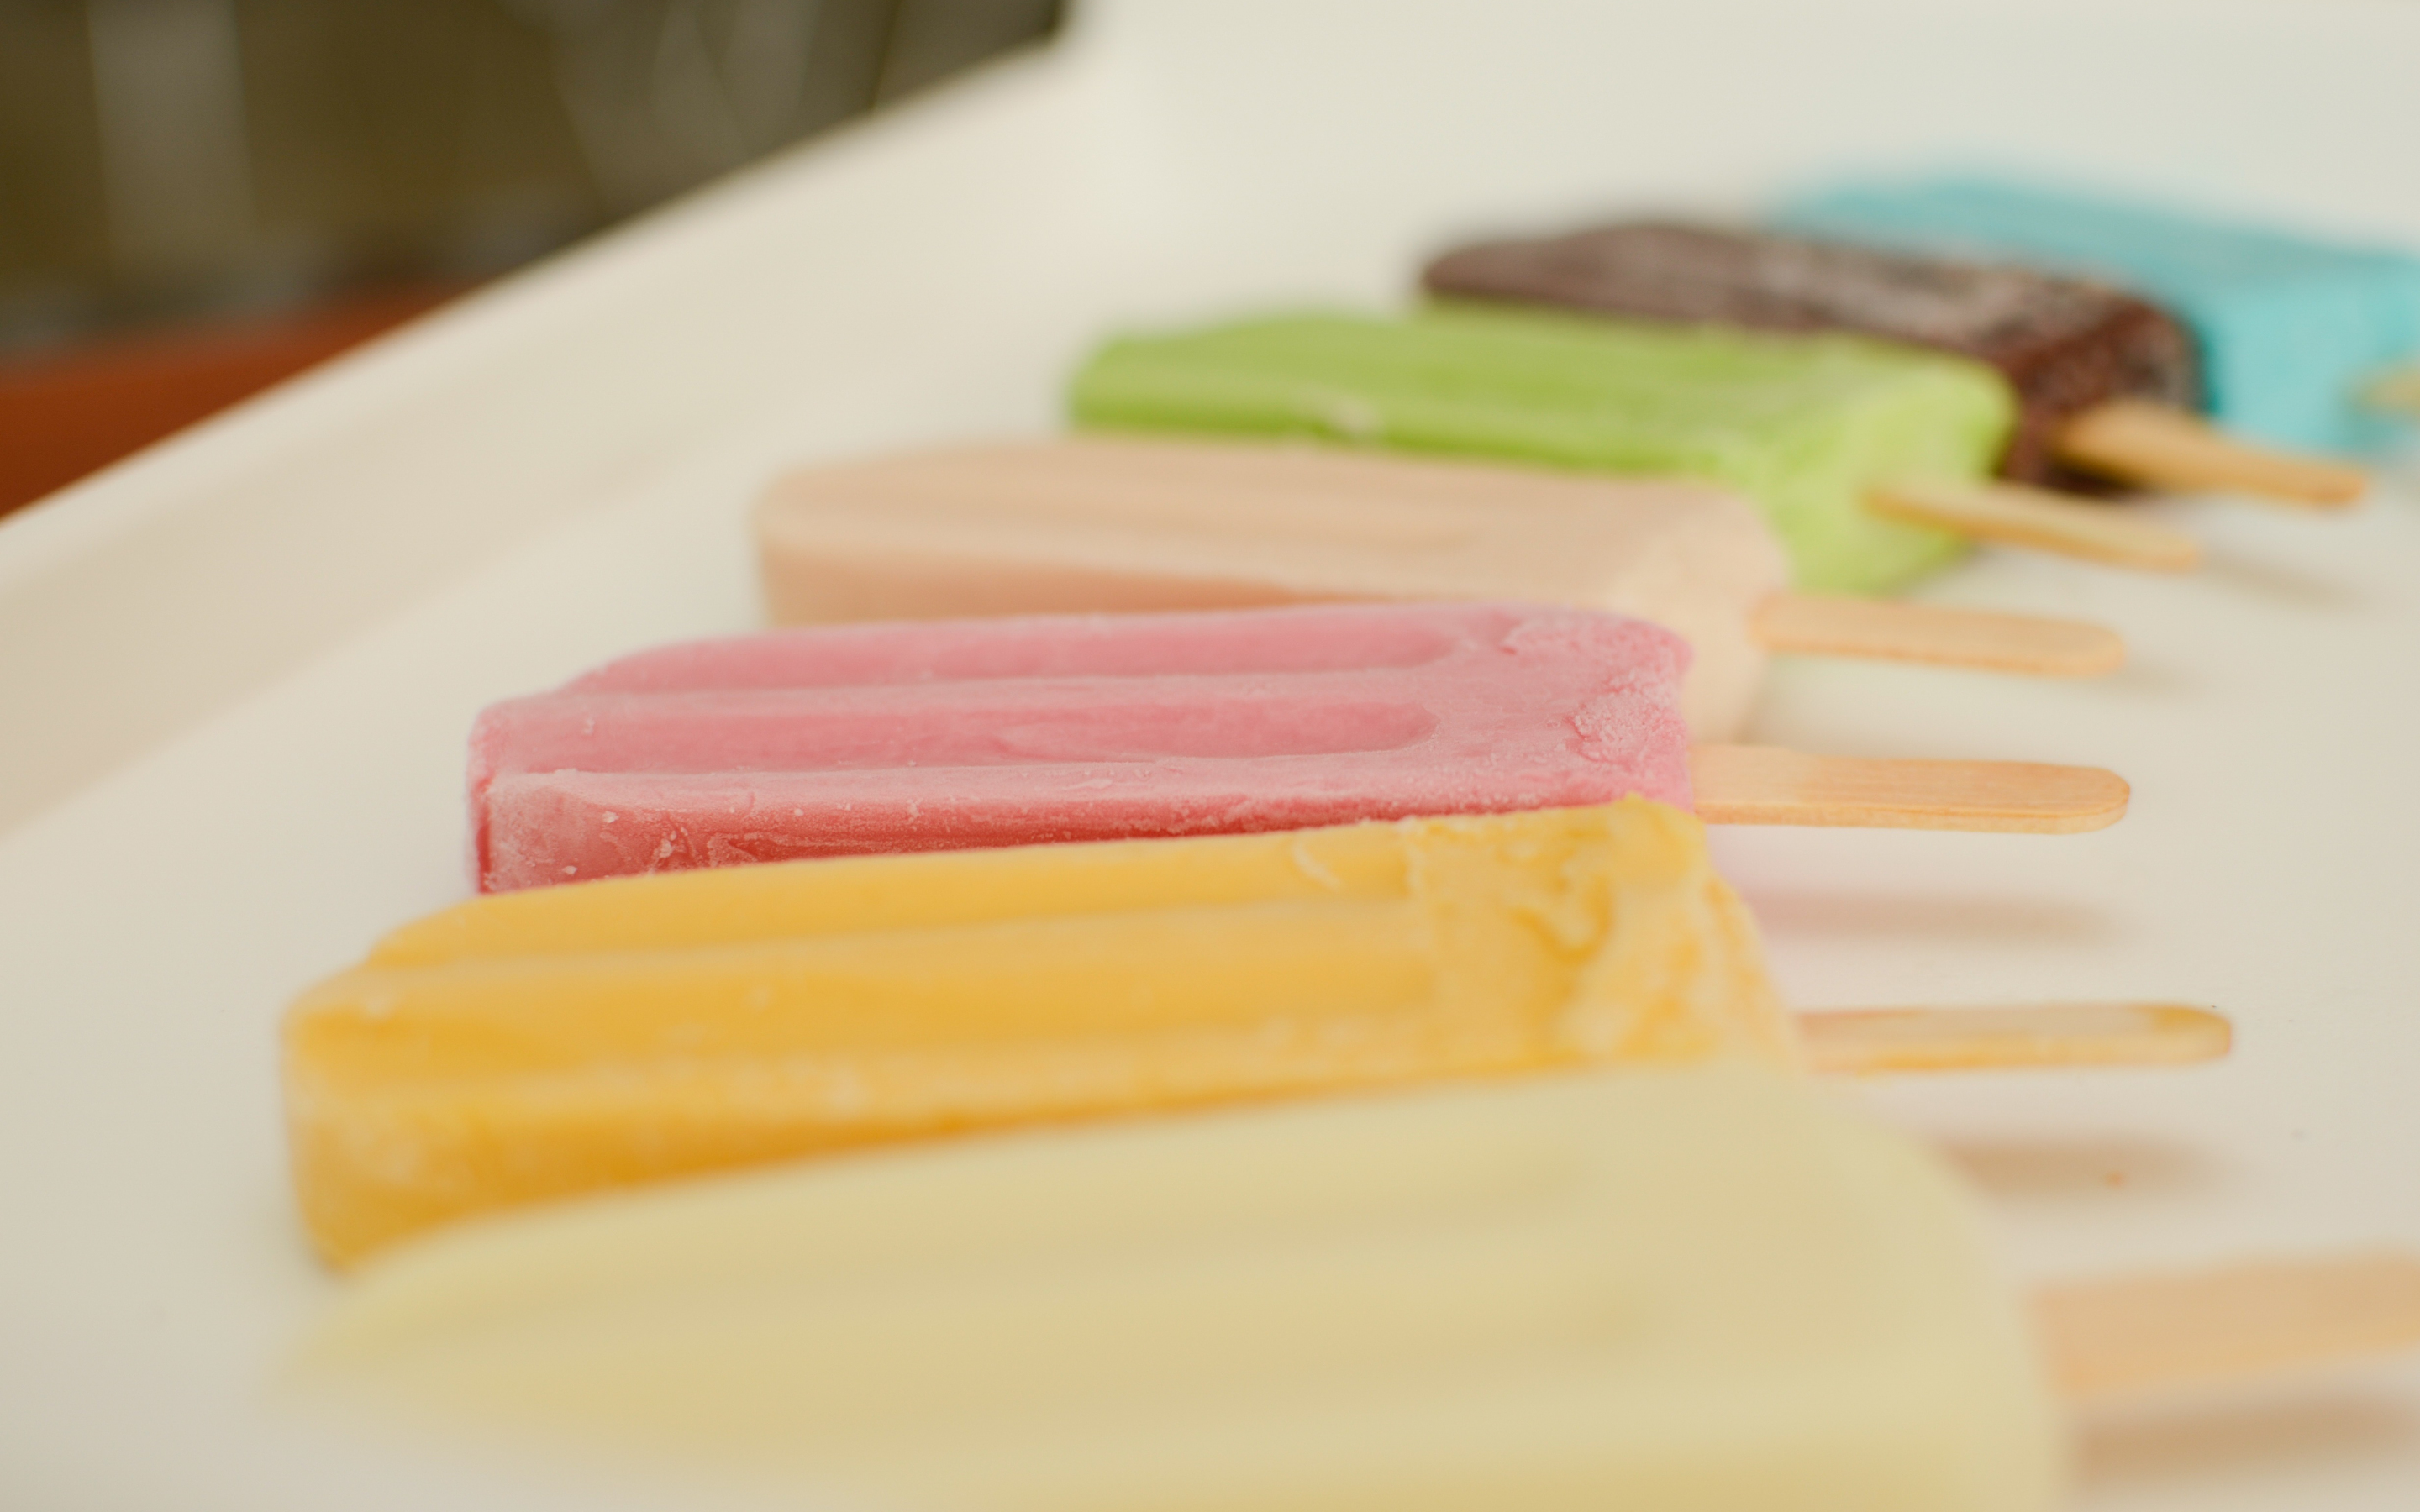 Colorful, ice candies, dessert, 2880x1800 wallpaper